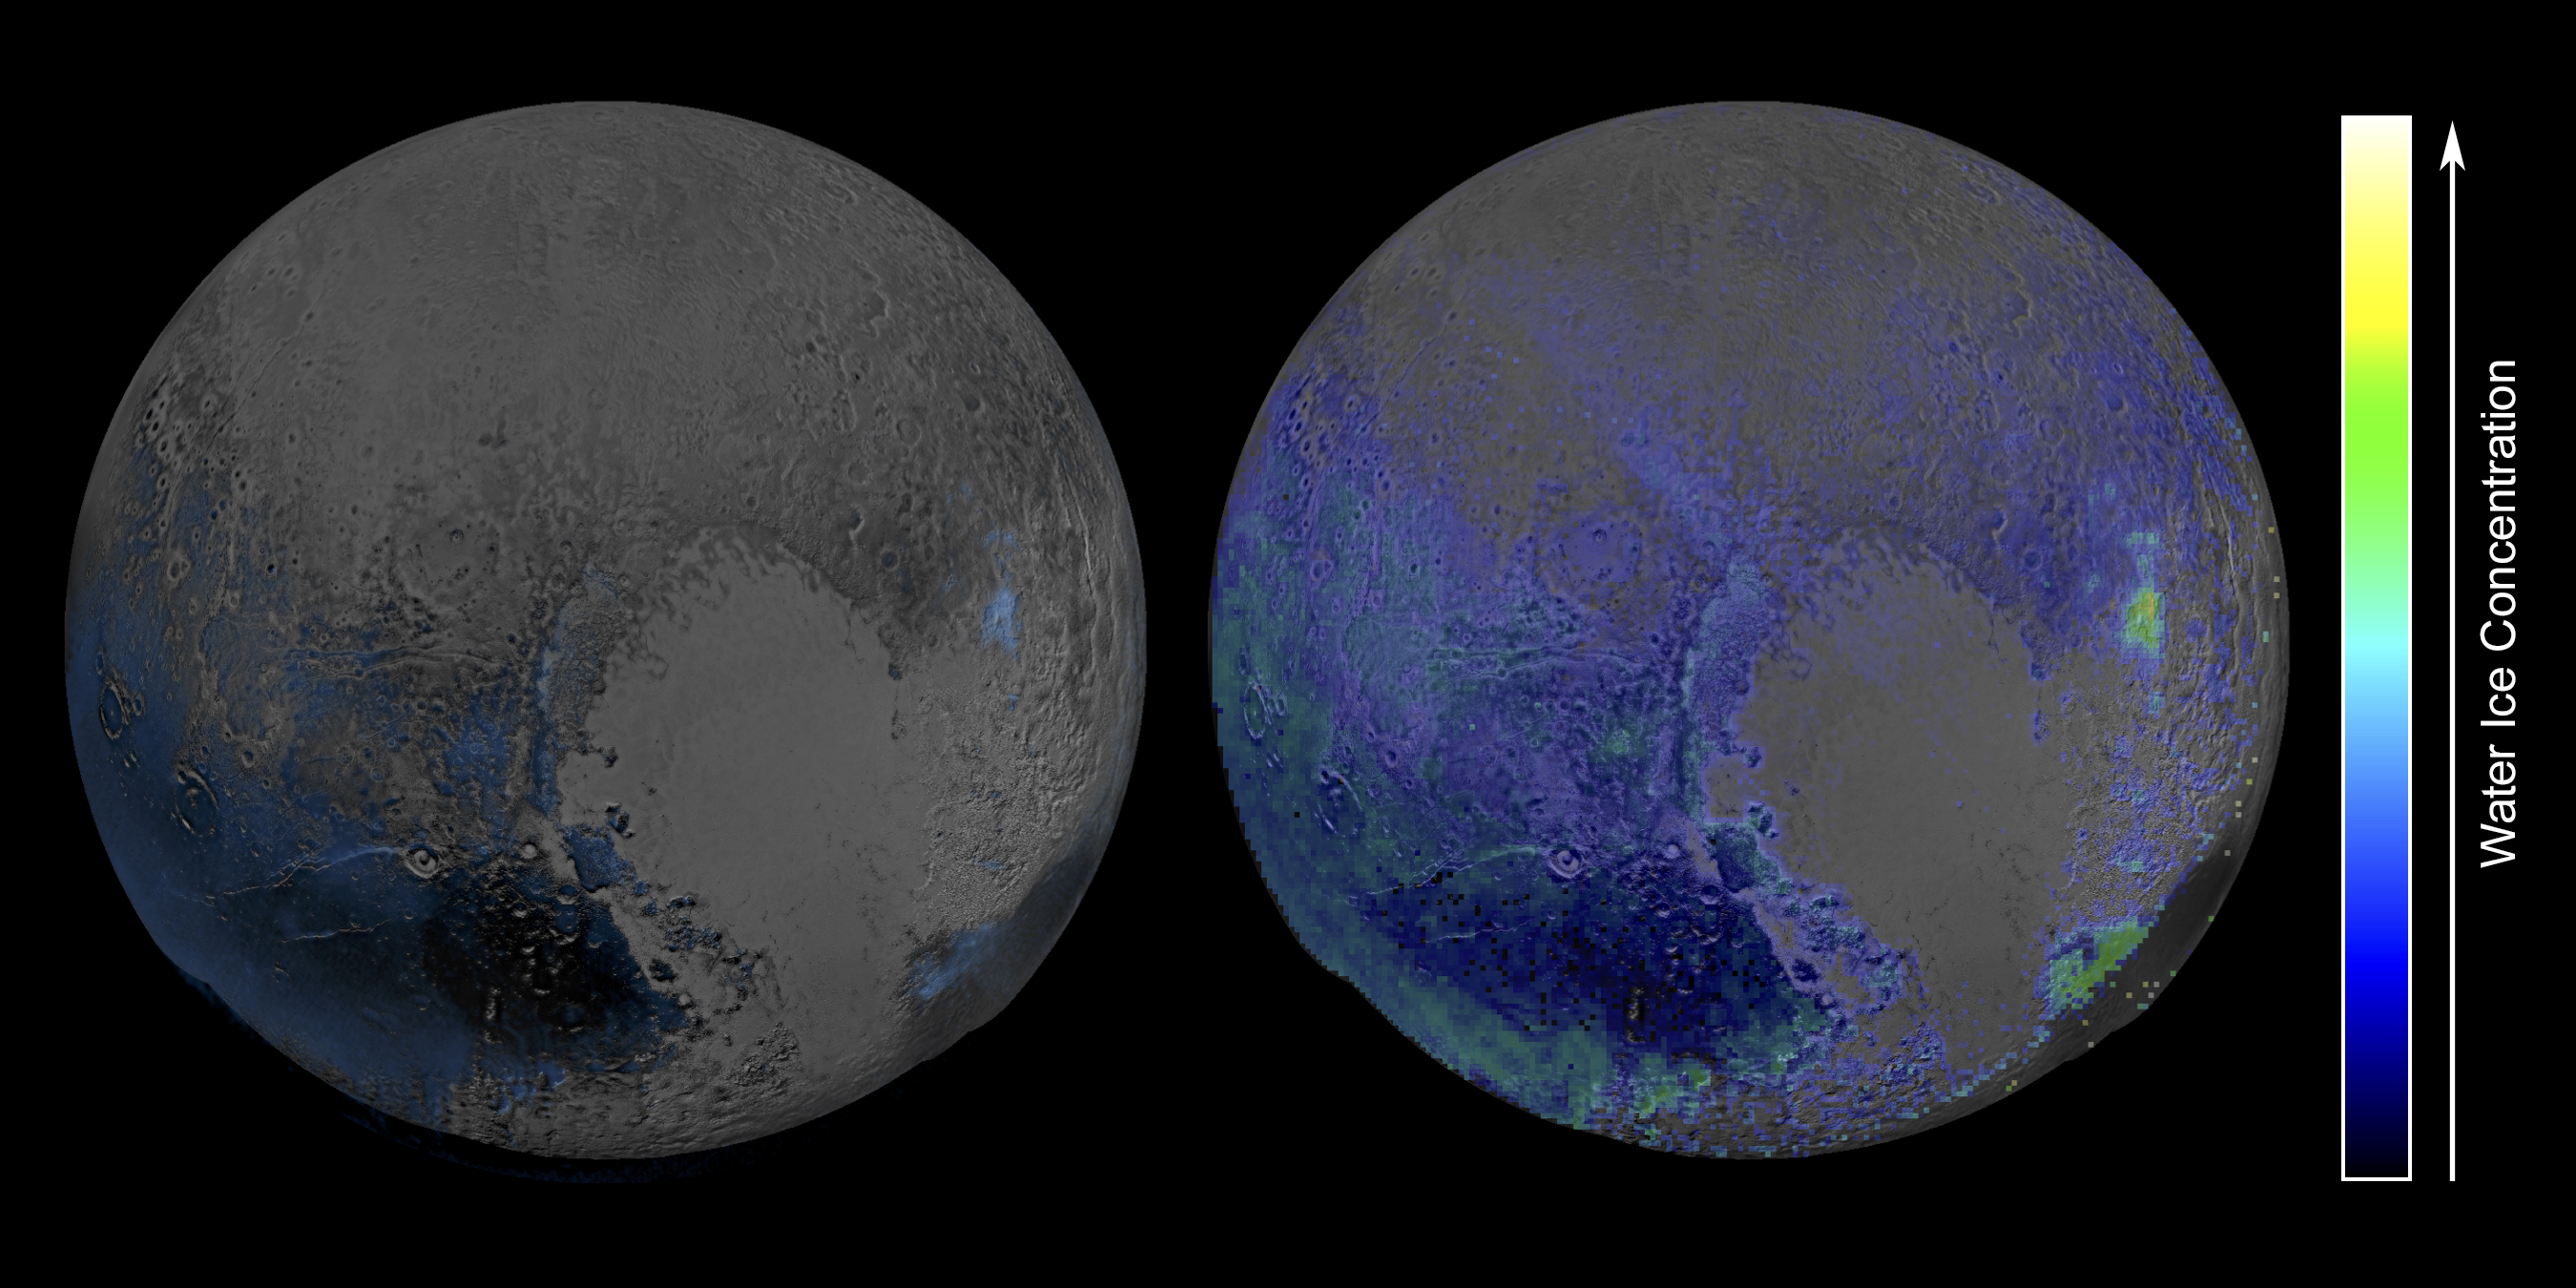 Pluto's Surface Has a Surprising Amount of Water Ice (Photo)